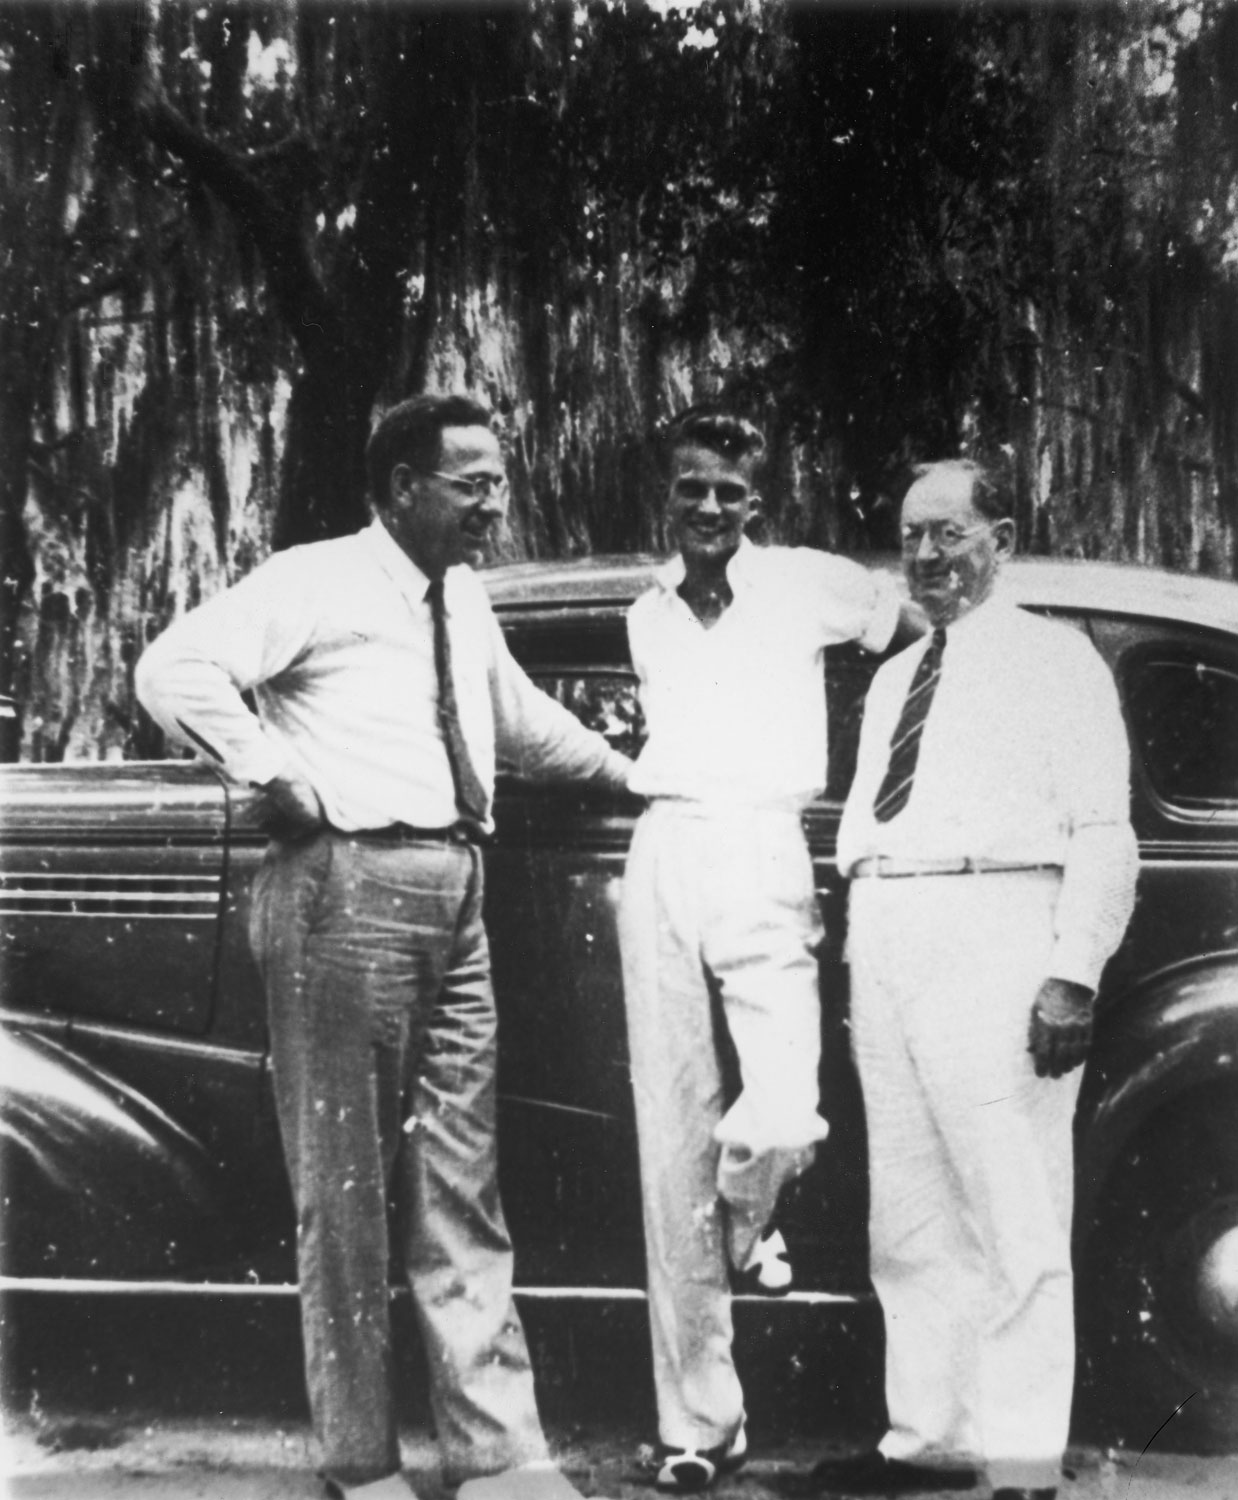 Graham (center) at the Florida Bible Institute in 1940. He eventually graduated from Wheaton College in Illinois in 1943.